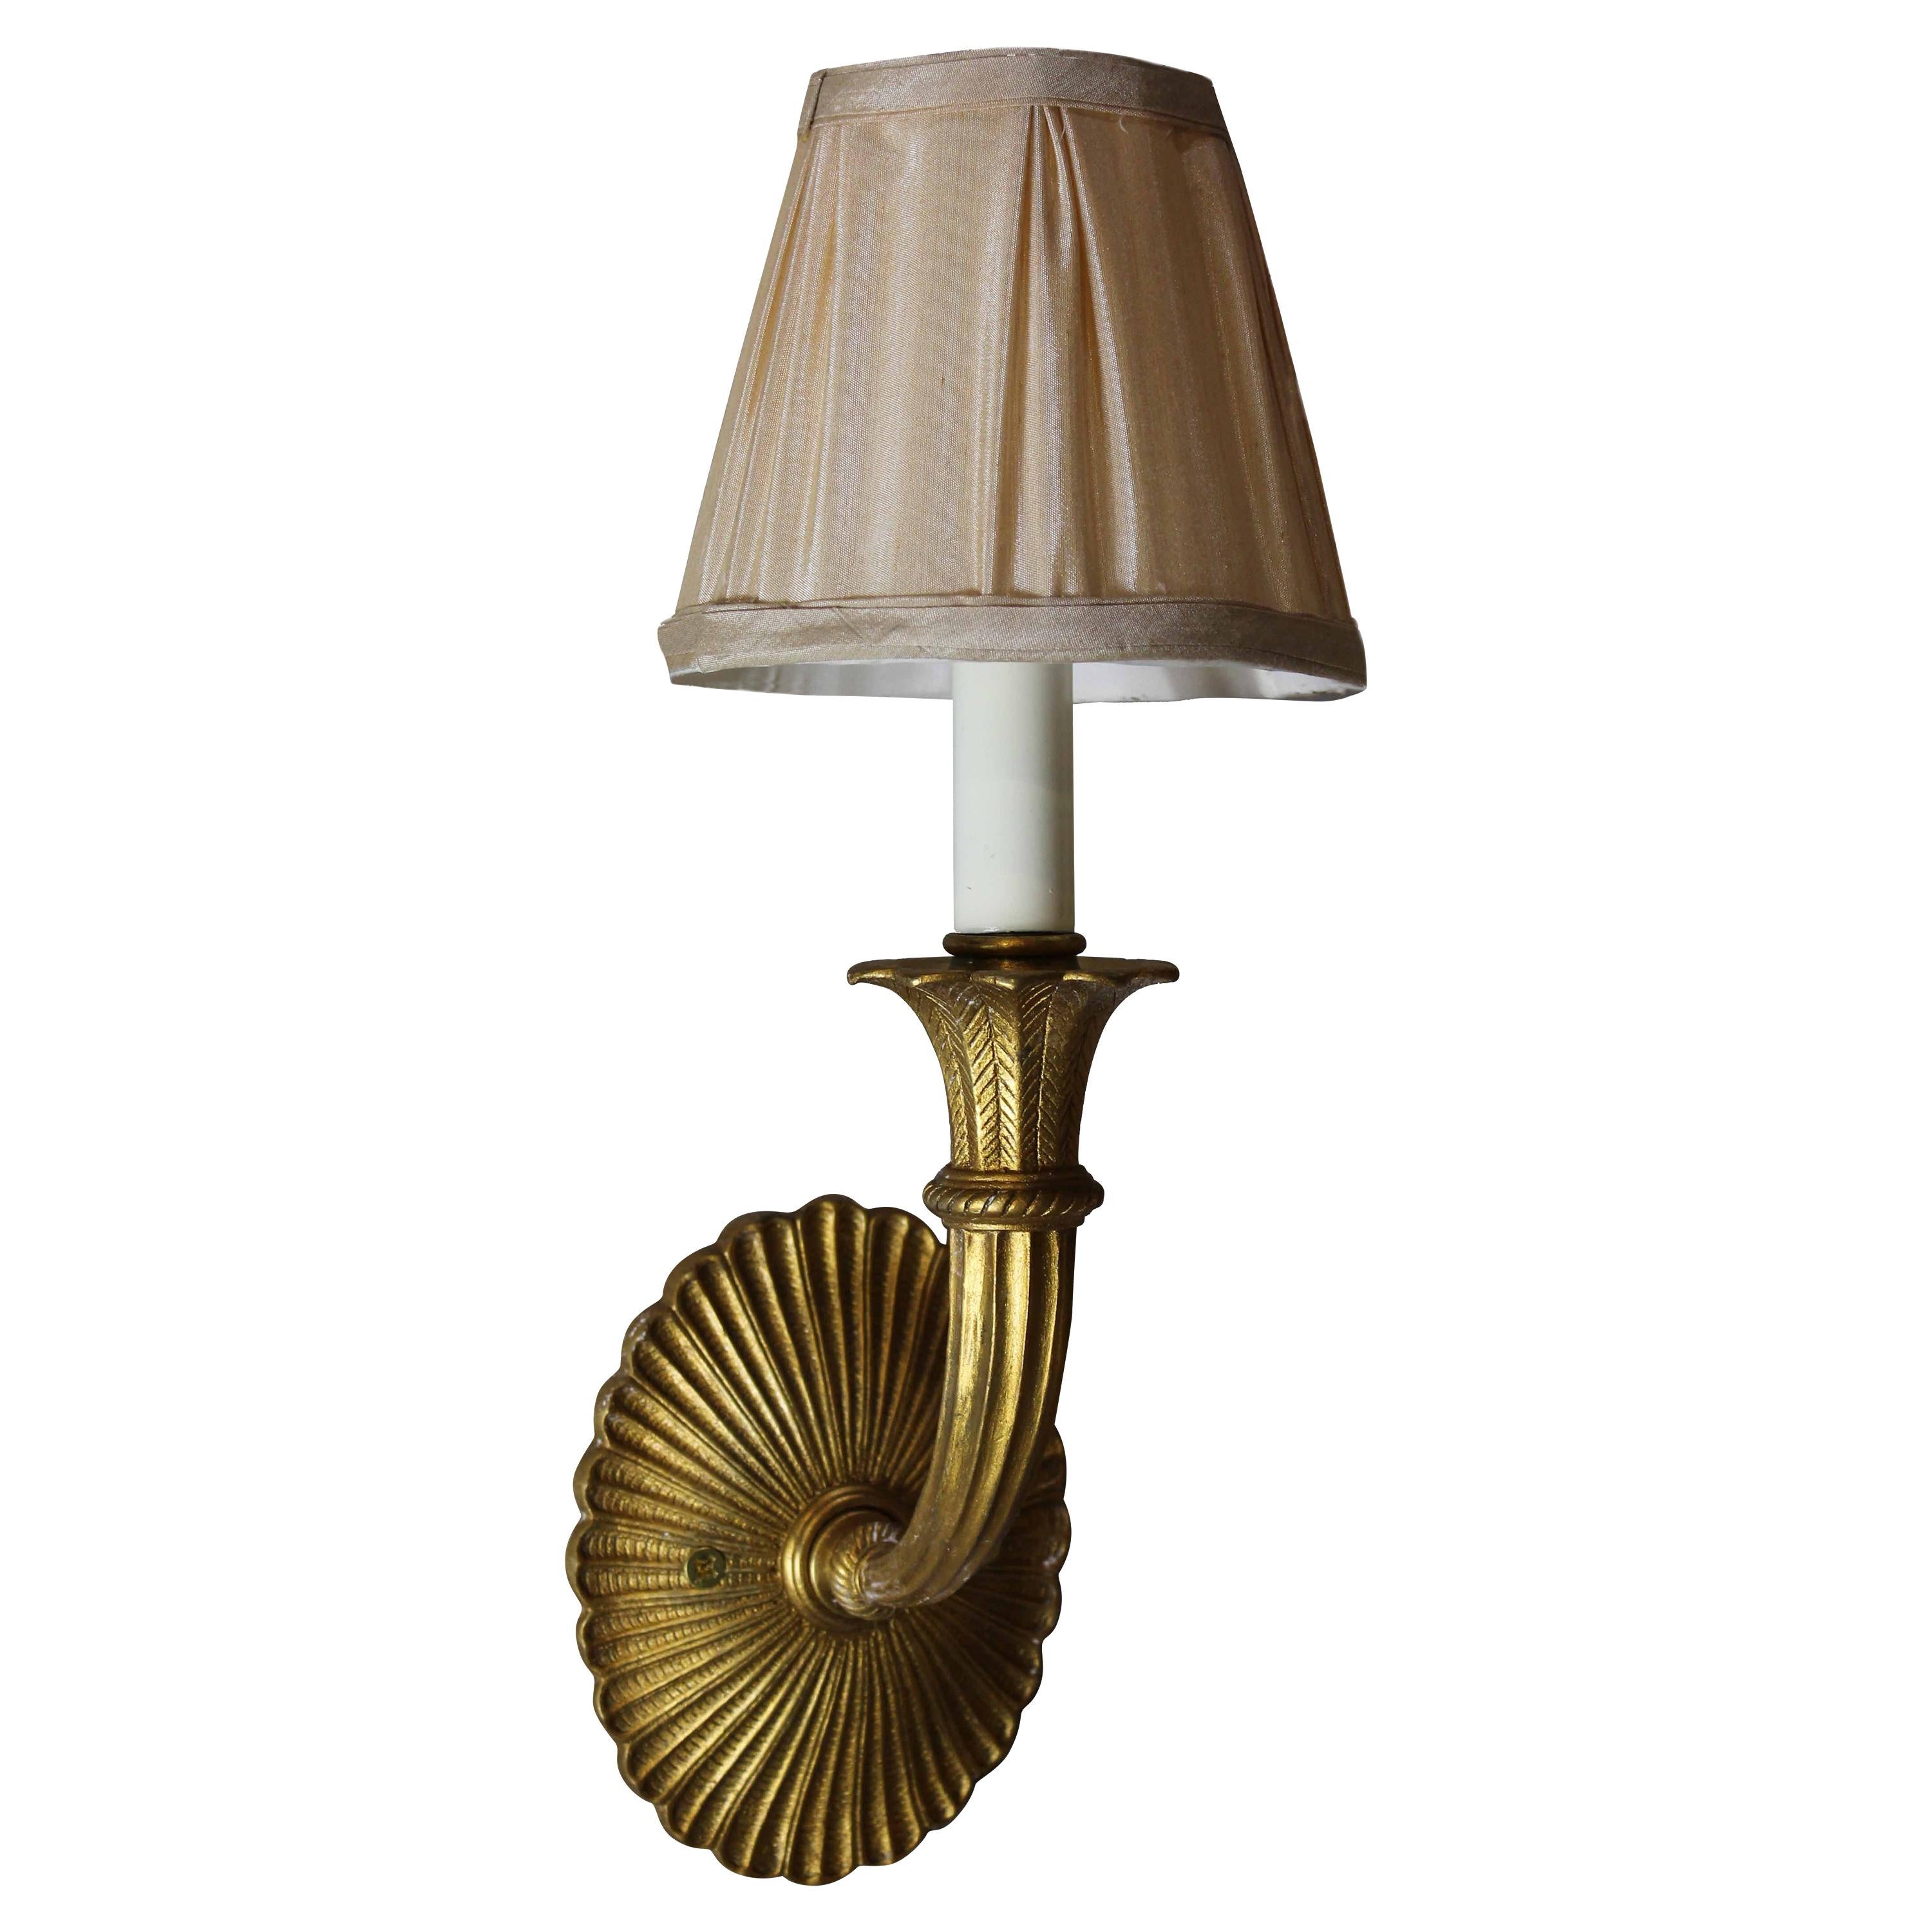 One Bronze Sconce, Chiseled and Gilt